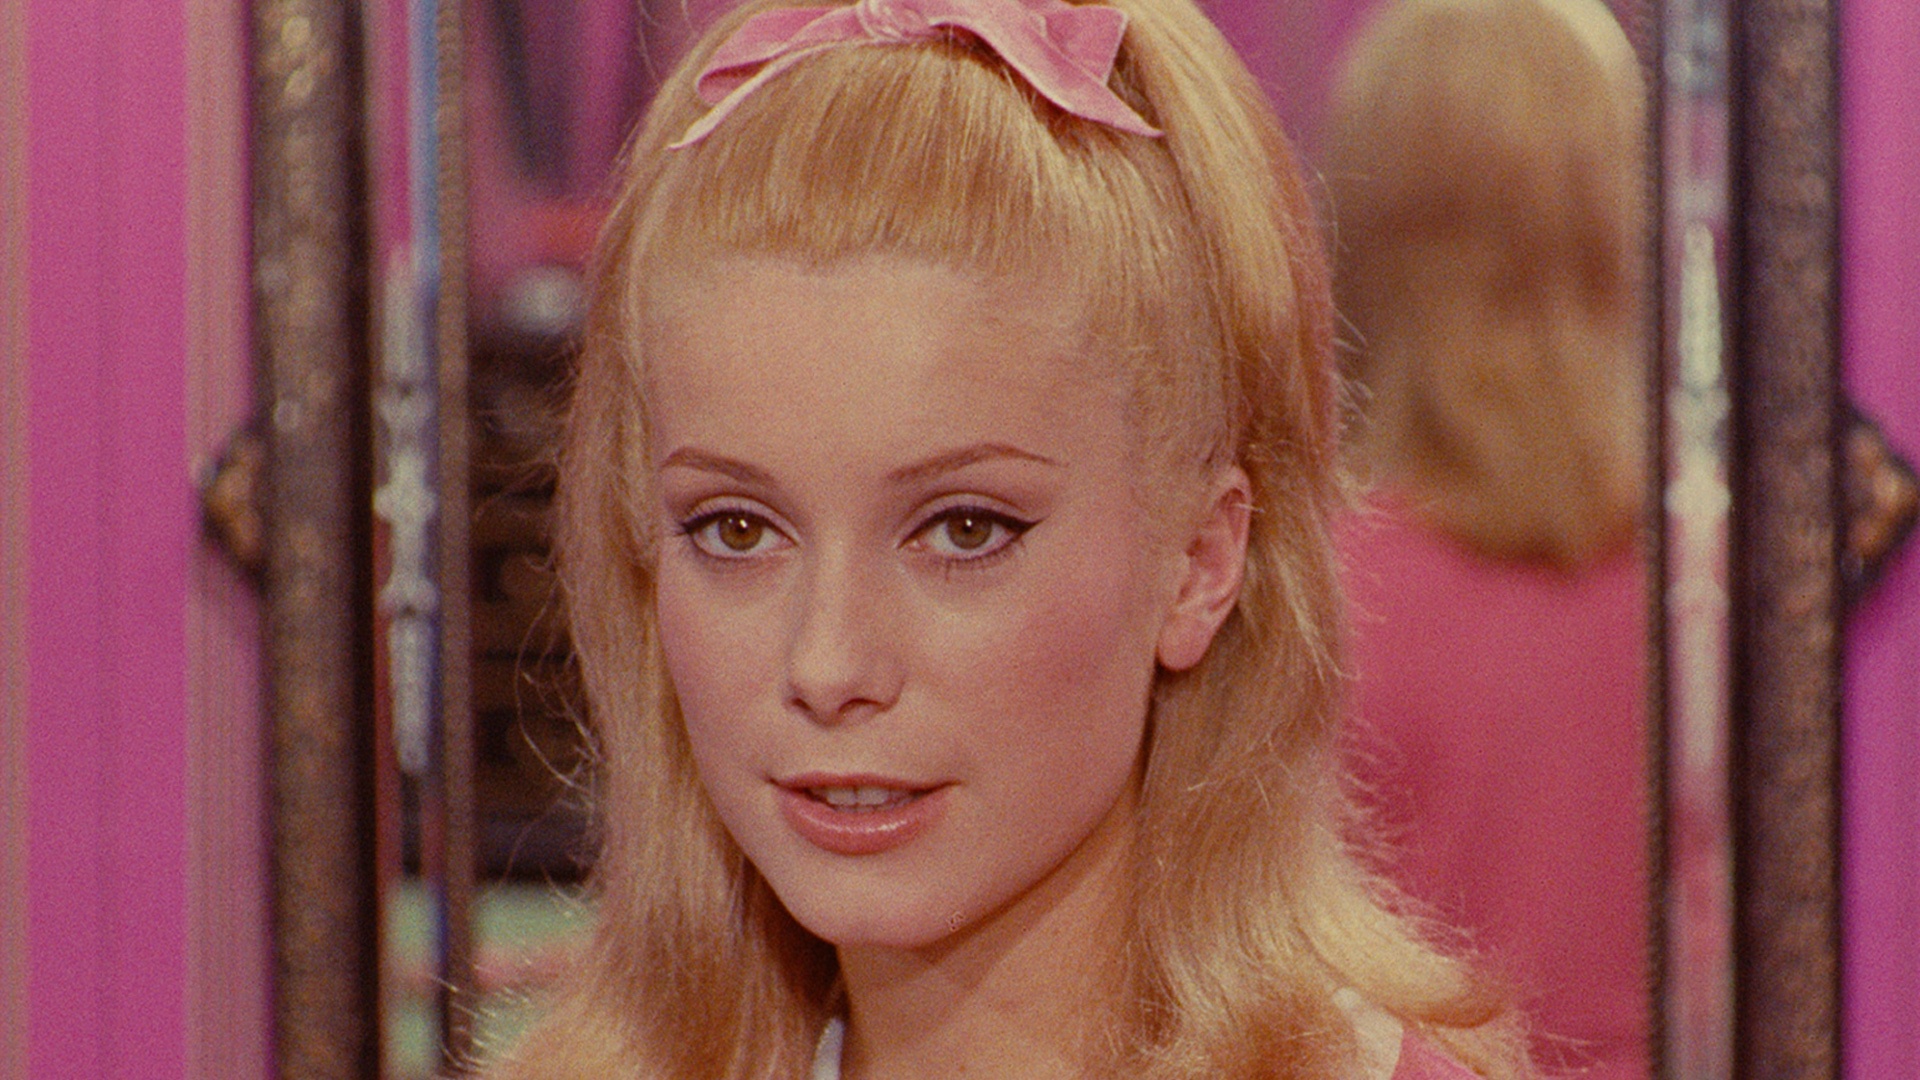 The Umbrellas of Cherbourg, Online movie streaming, Captivating visuals, Charming love story, 1920x1080 Full HD Desktop